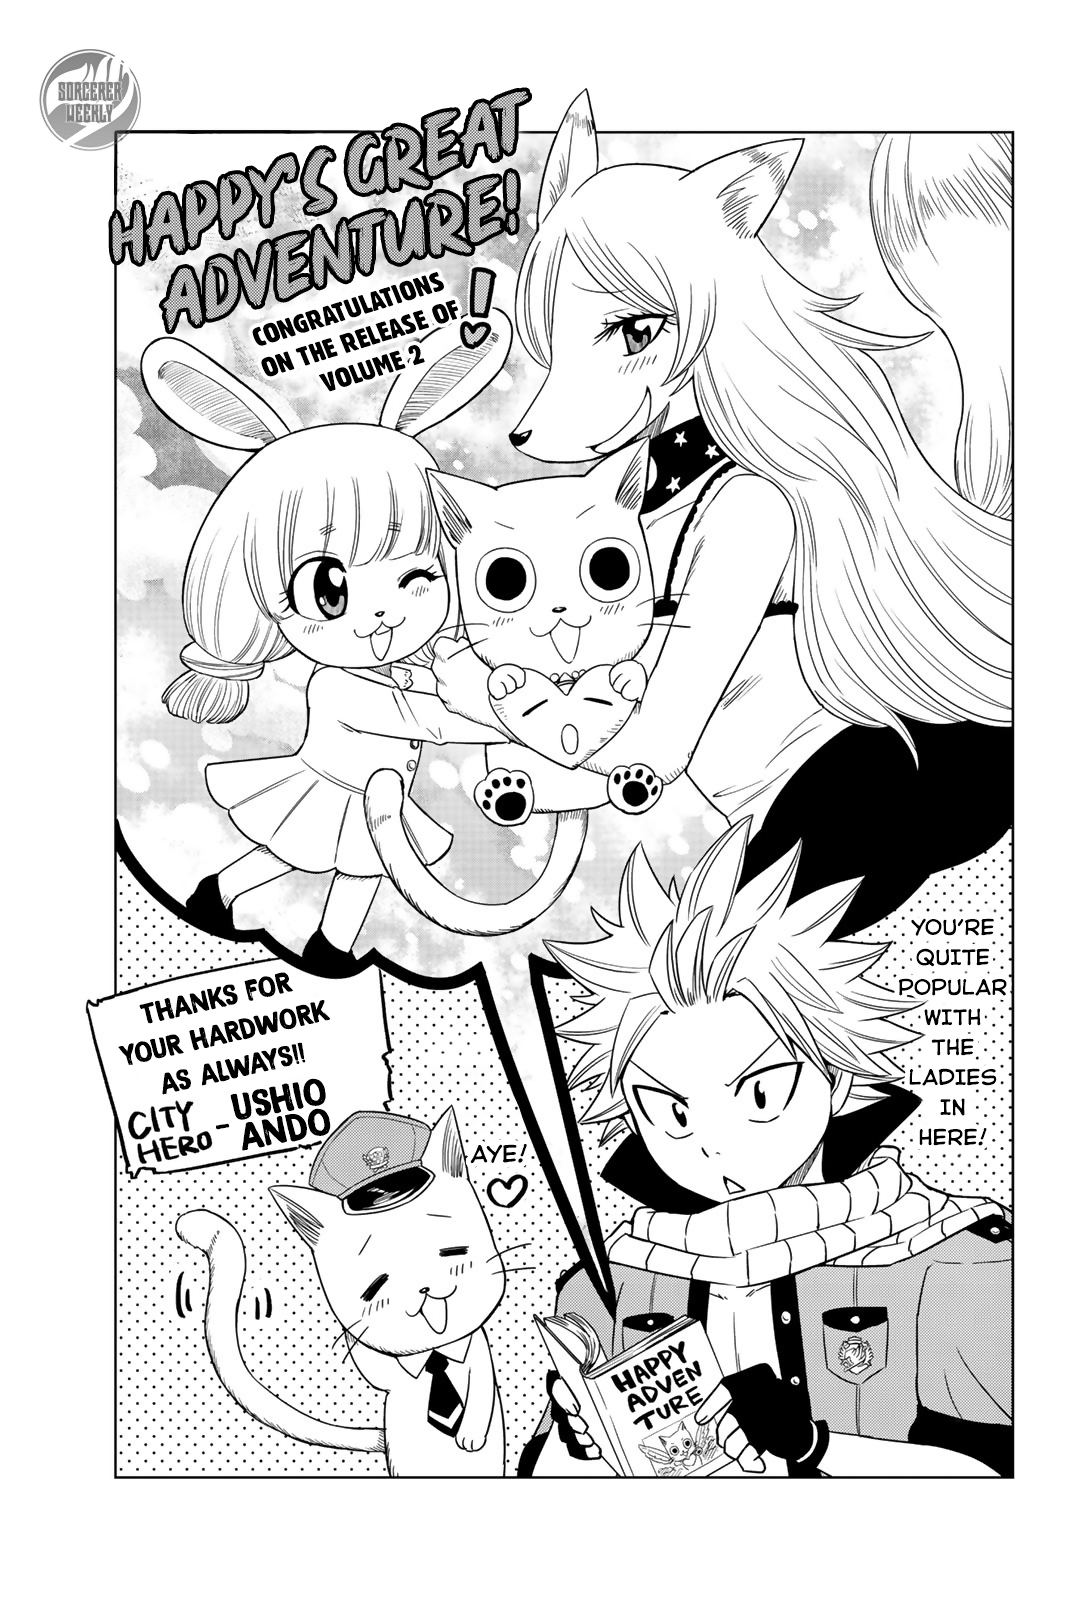 Fairy Tail: Happy's Great Adventure Vol. 2 Ch. 20.5 Volume 2 Afterword and Omake